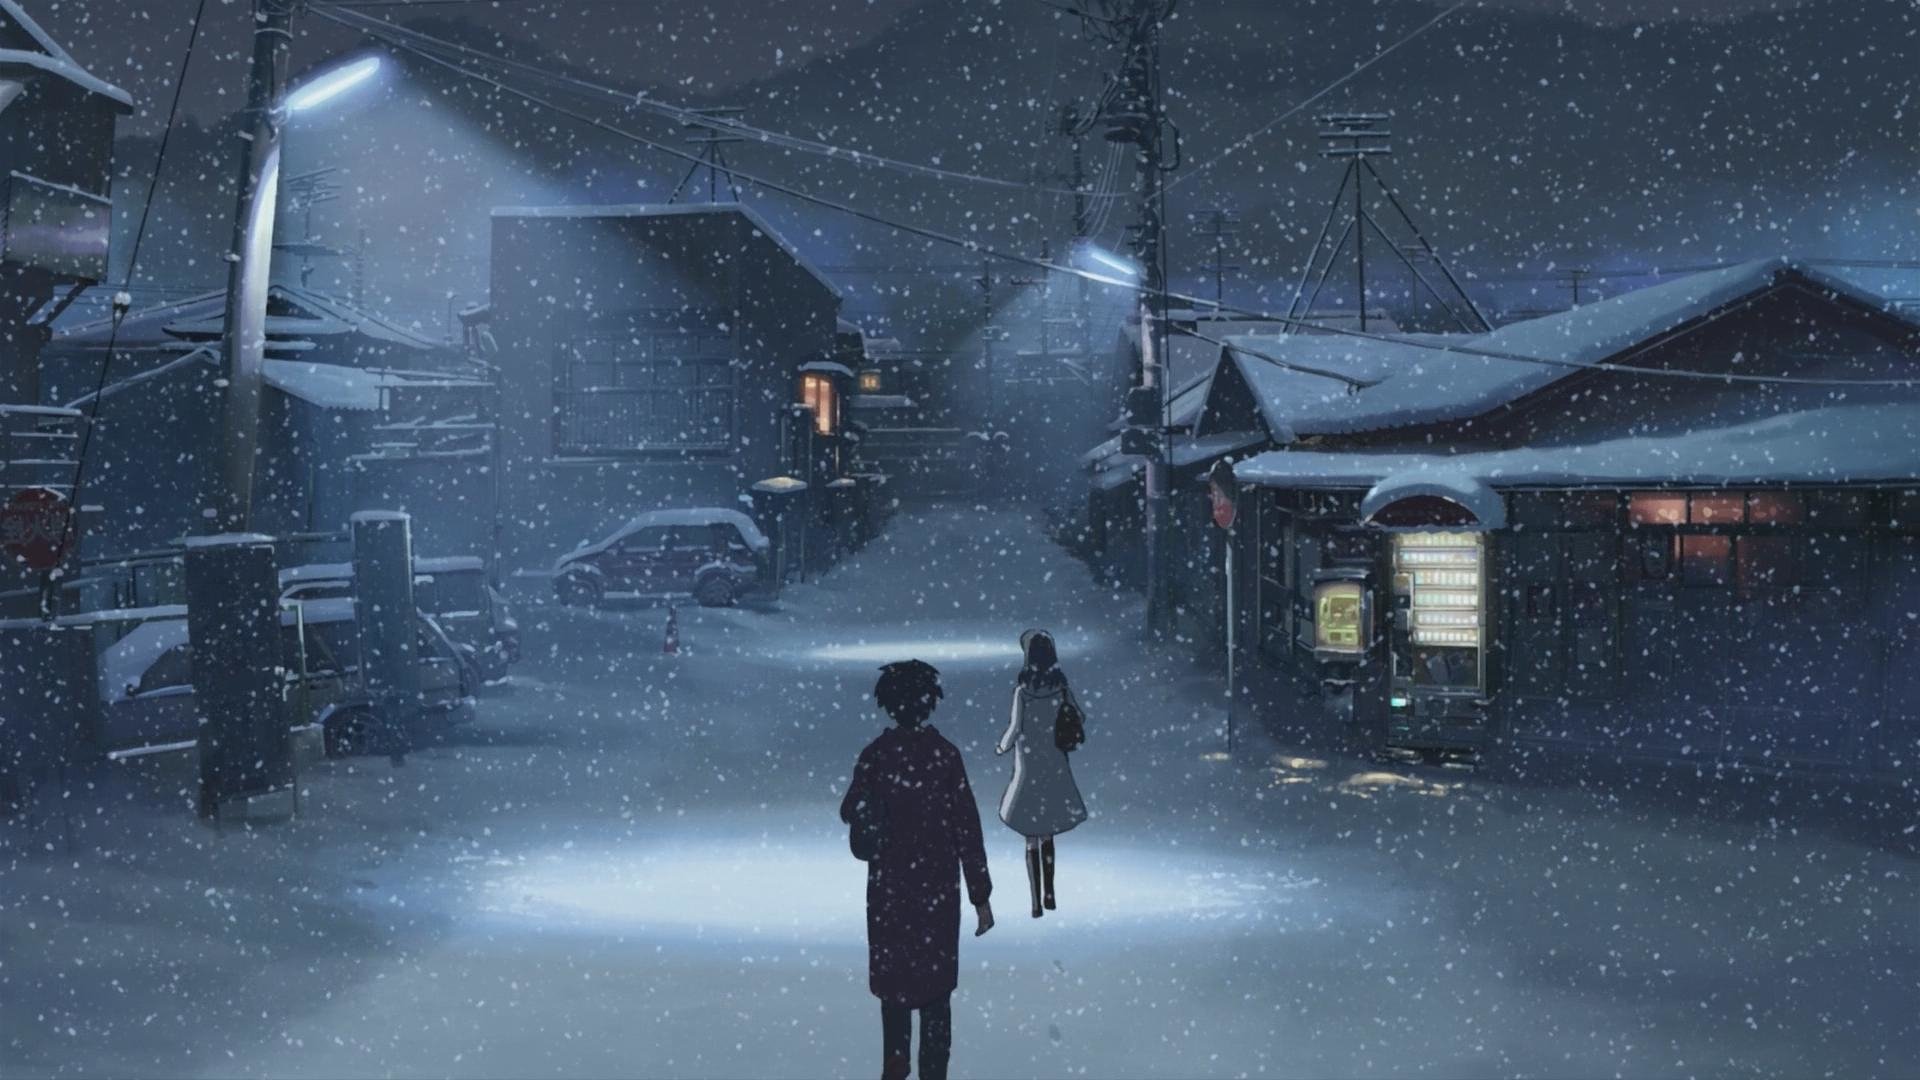 Anime Winter Scenery Wallpapers